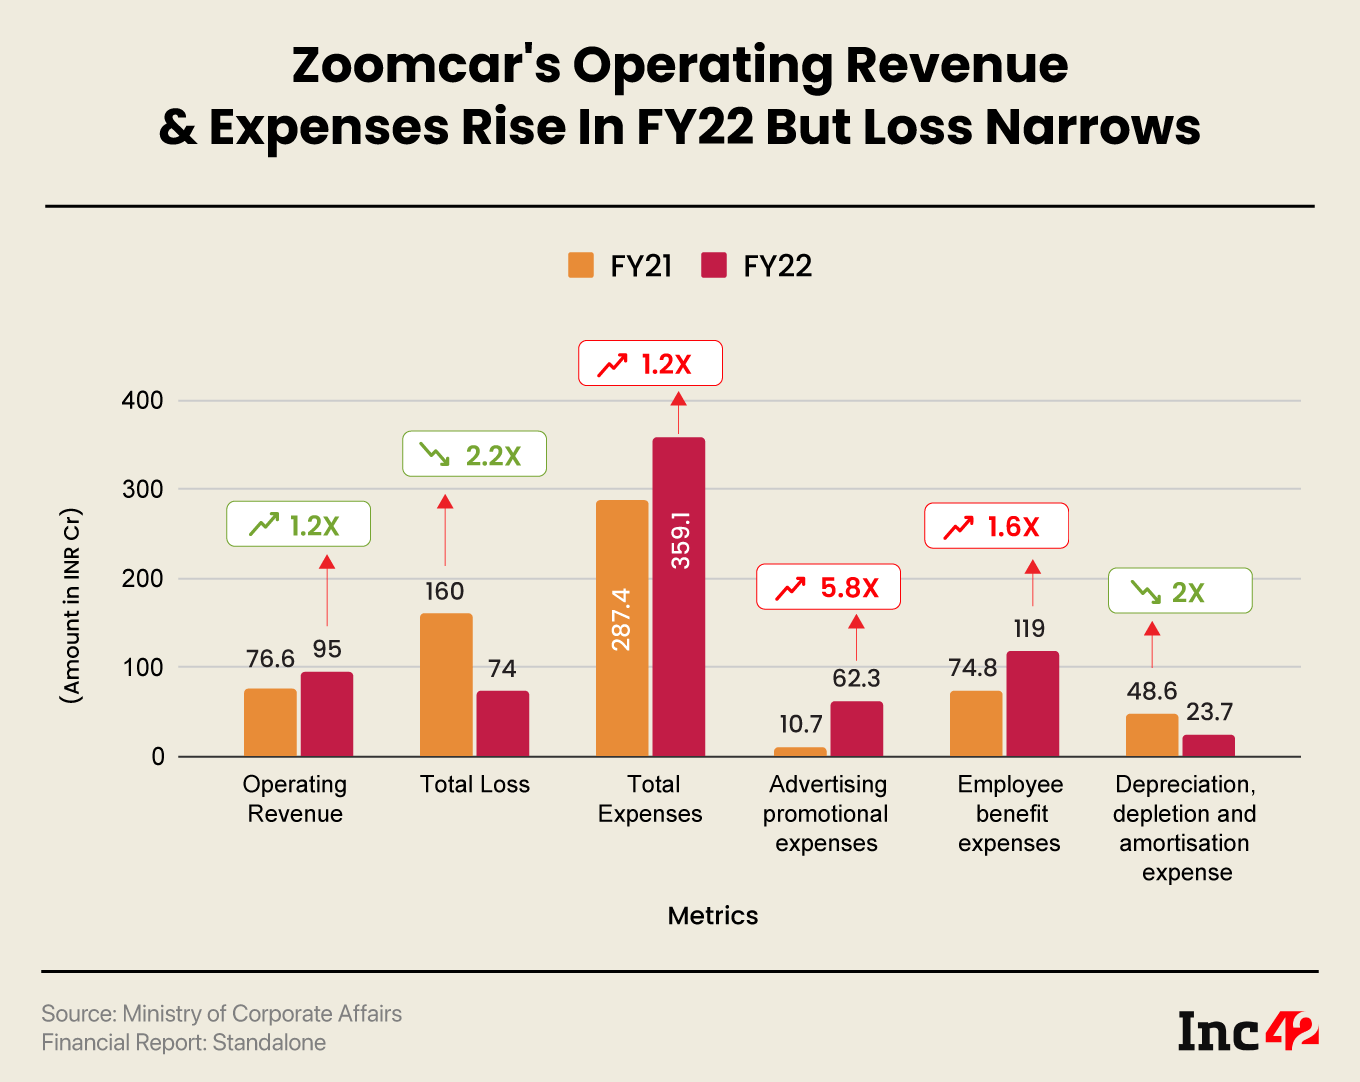 Zoomcar's Operating Revenue & Expenses Rise In FY22 But Loss Narrows